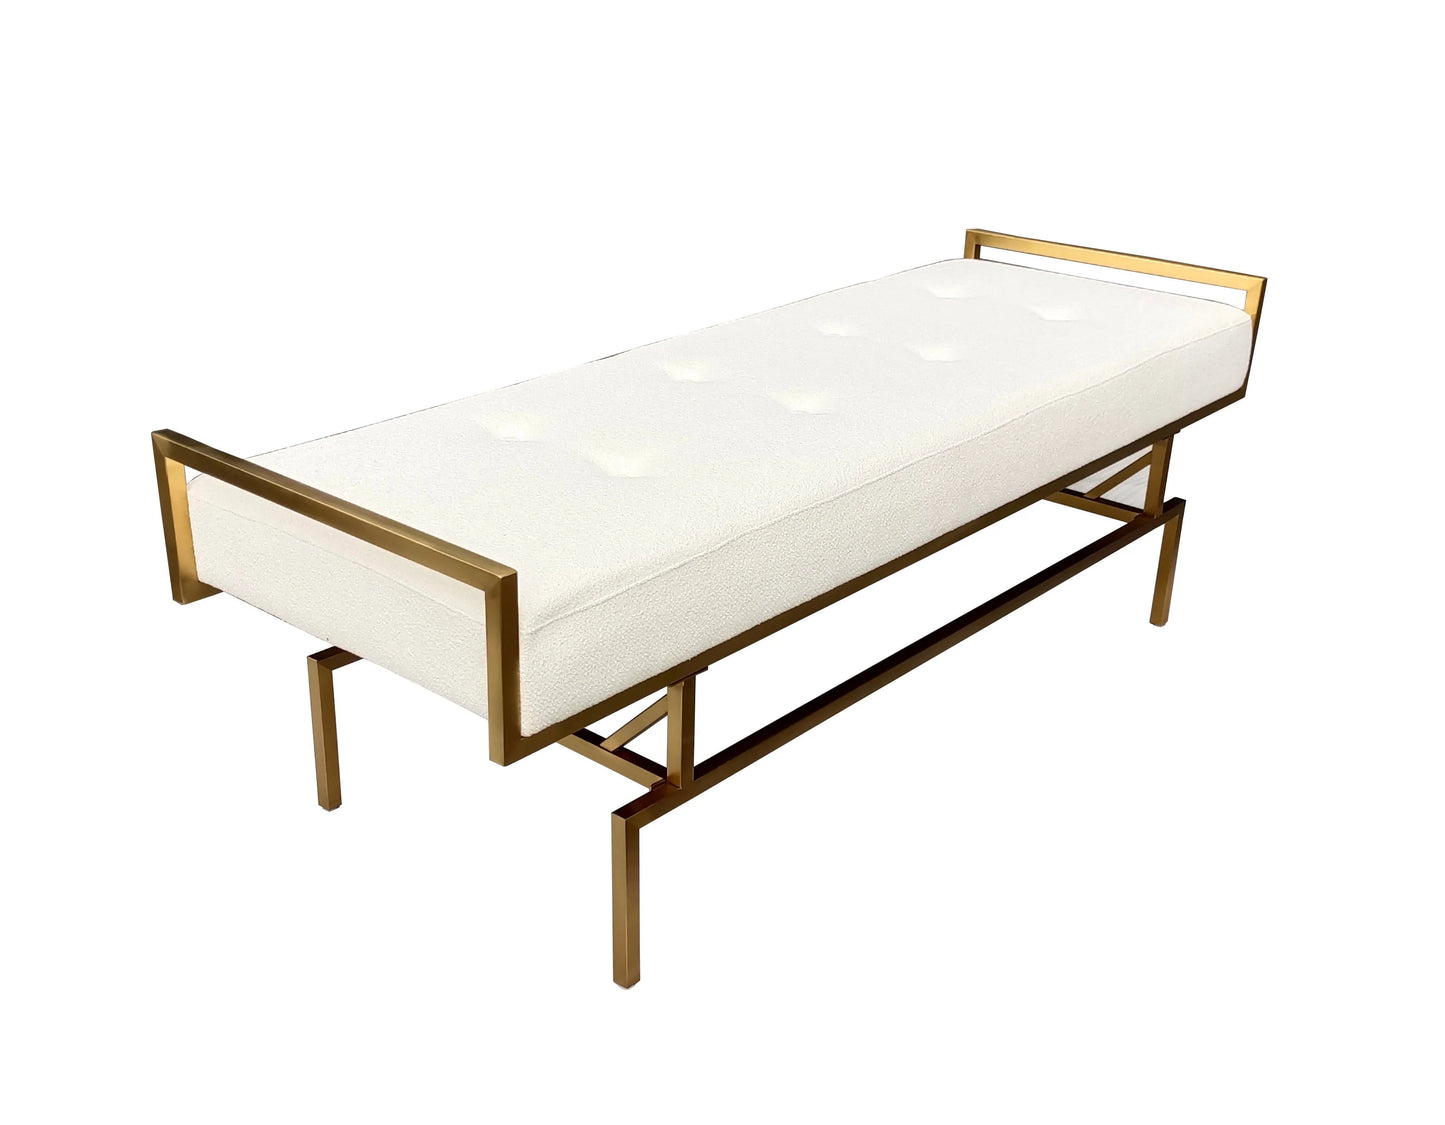 Gold Brushed Bench